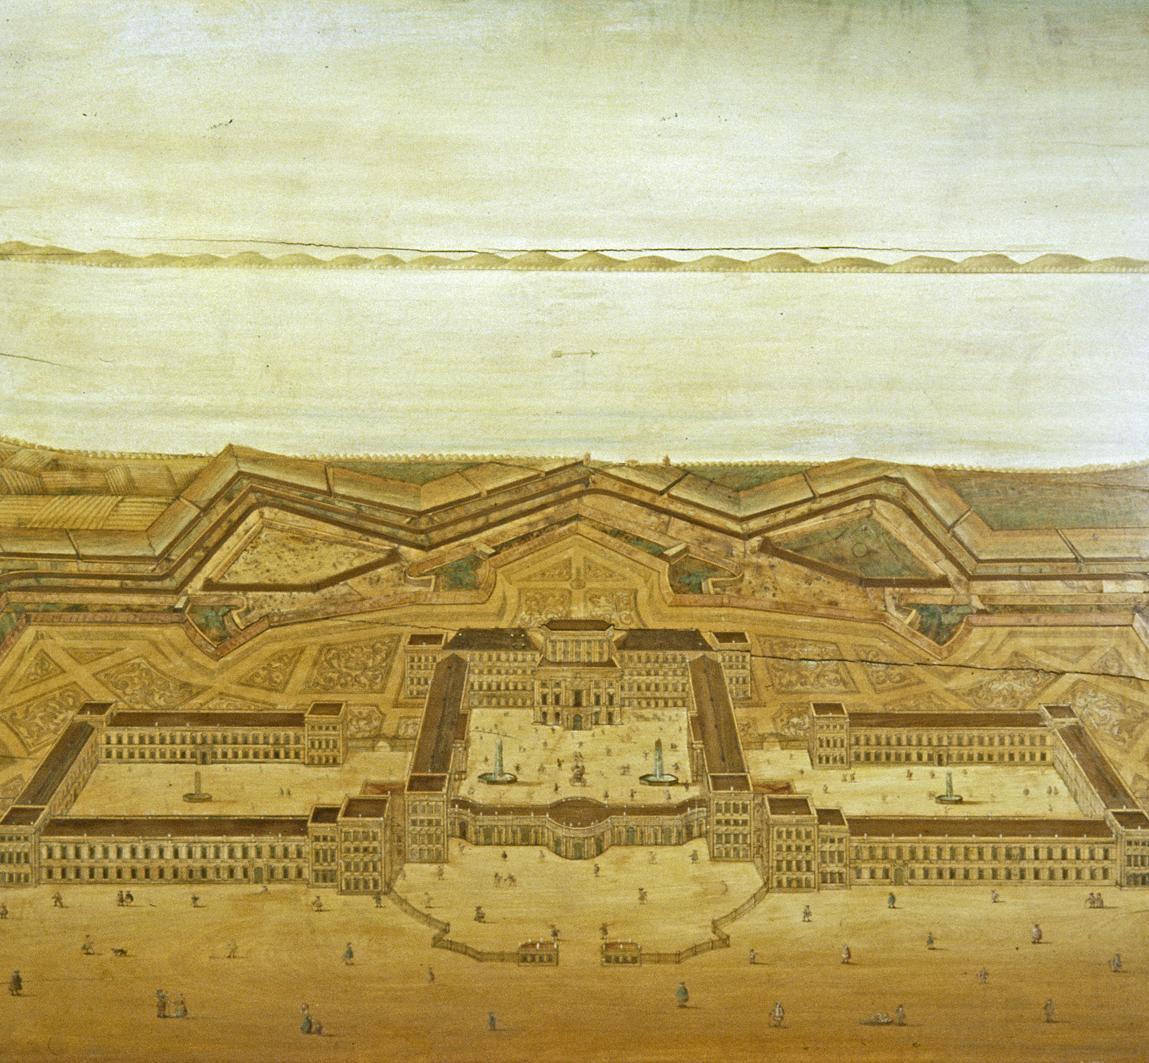 Mannheim Baroque Palace, inlaid image with the palace and fortifications by Jean Clemens Froimont, circa 1725